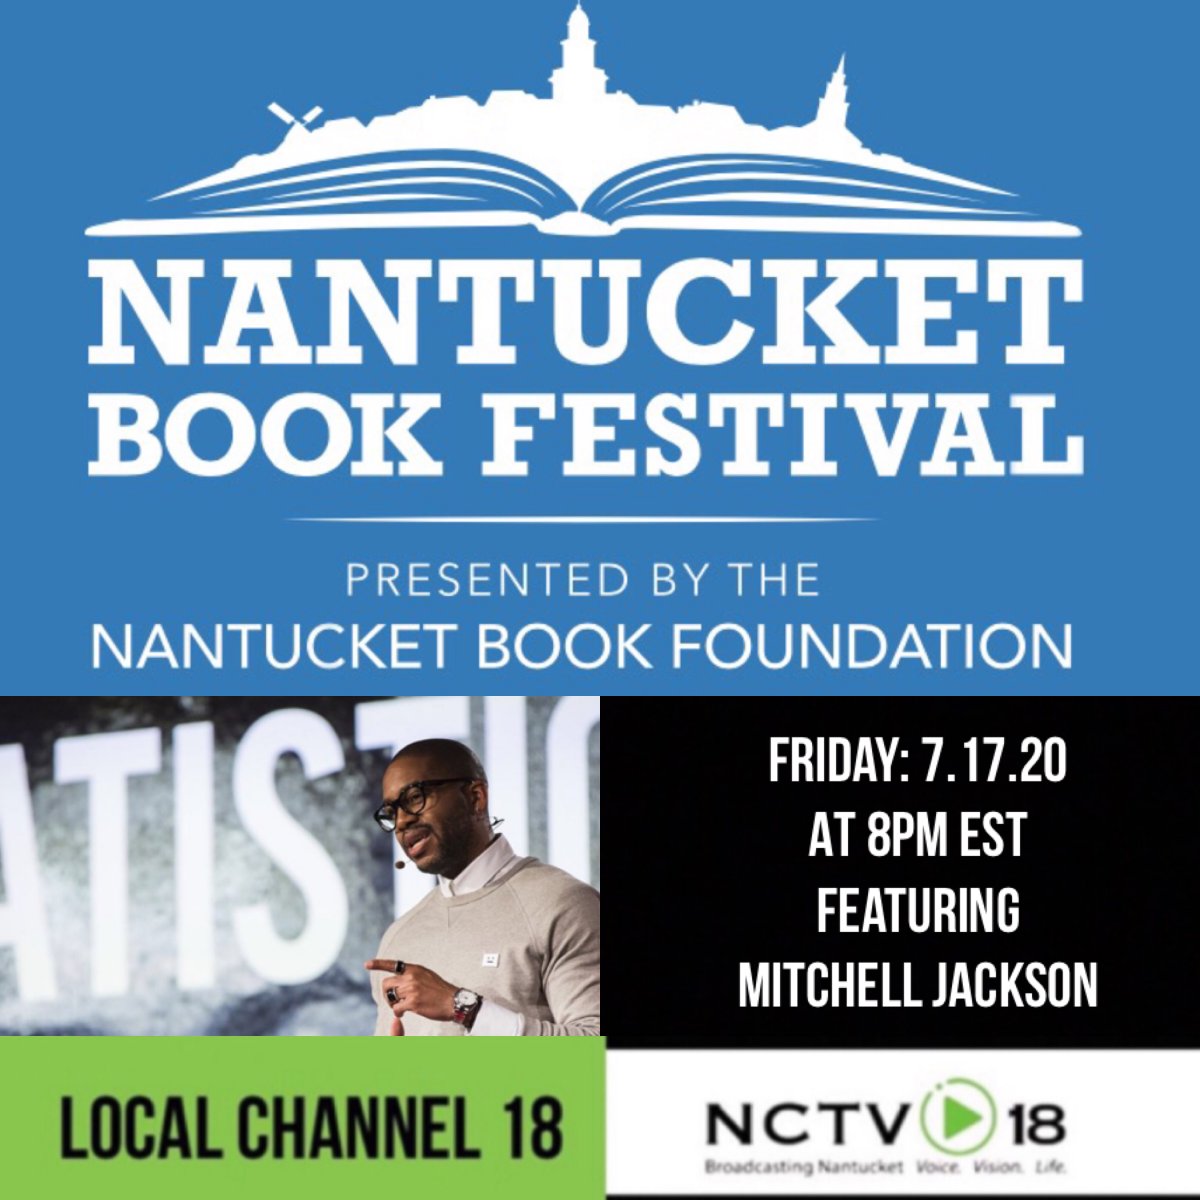 NANTUCKET BOOK FESTIVAL:
AT HOME WITH AUTHORS SERIES 
Friday, July 17, 2020 at 8pm EST
Local Channel 18

#nantucketbookfestival #athomewithauthors #nantucket #mitchelljackson #mitchellsjackson #nctv18 #visionvoicelife #letsrollnantucket